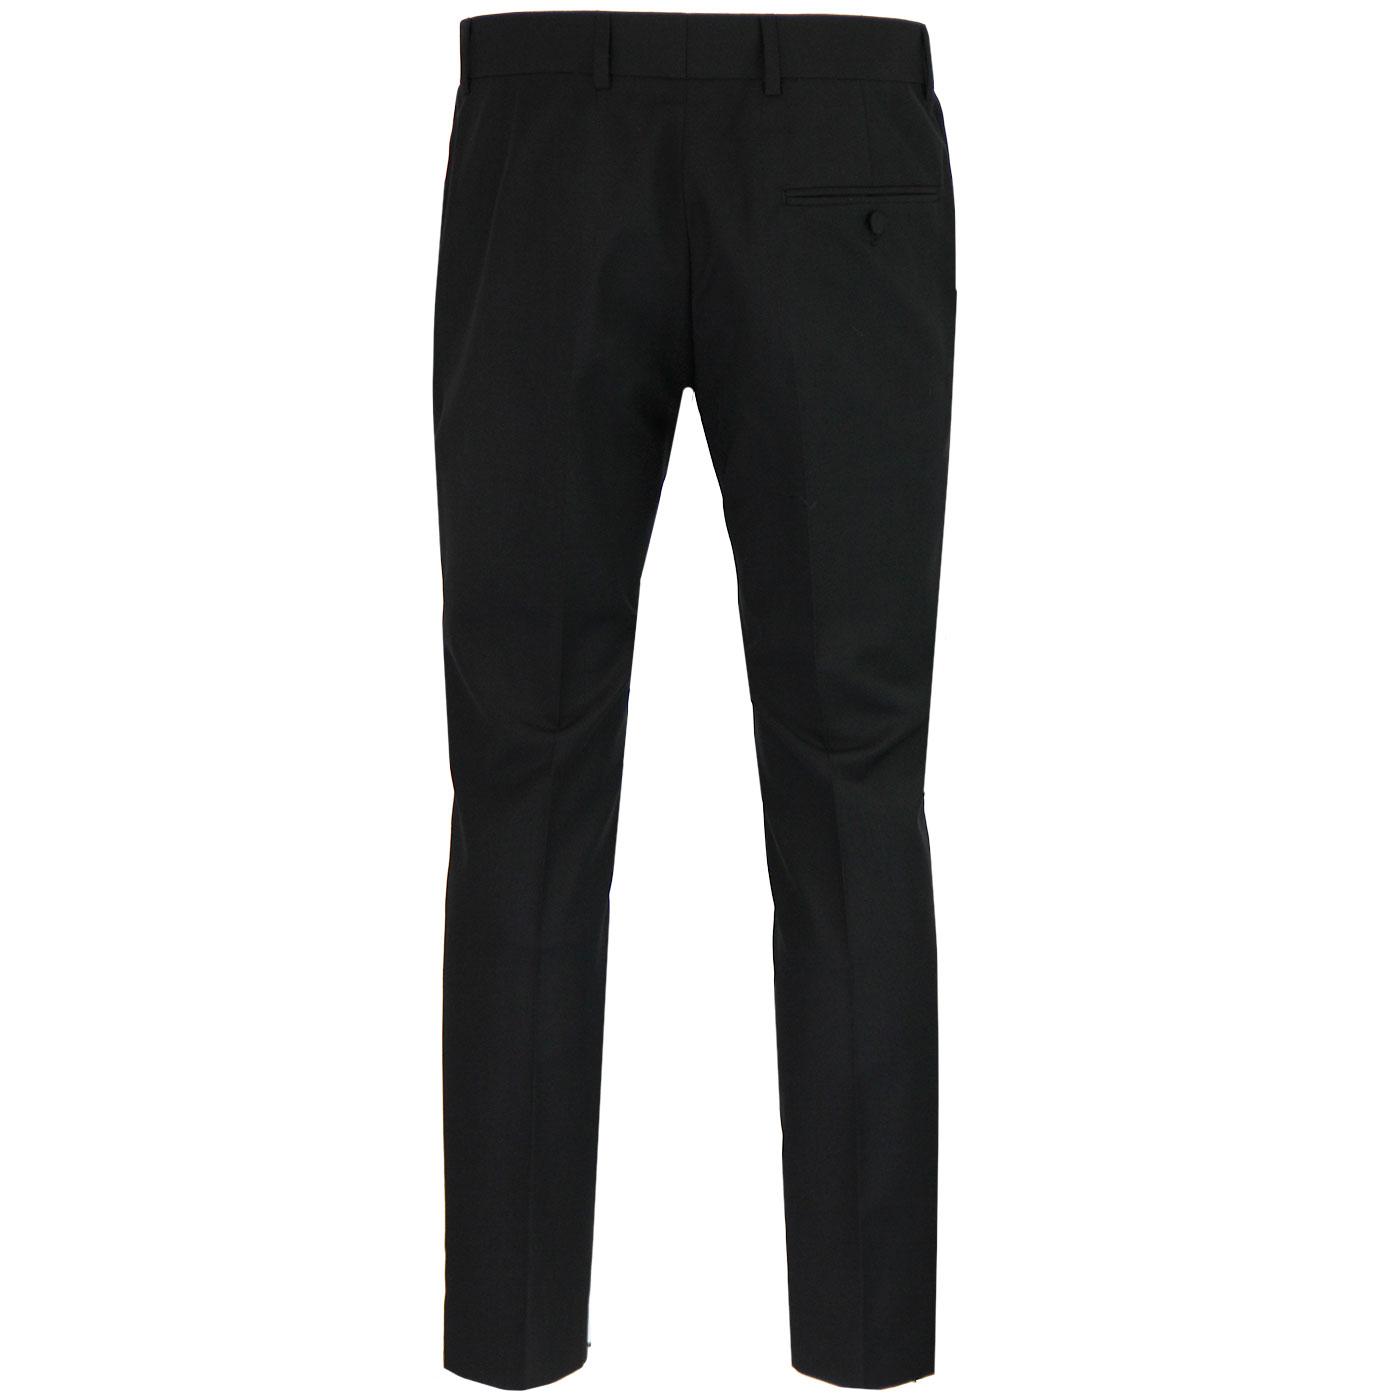 MADCAP ENGLAND Mod Mohair Slim Suit Trousers in Black